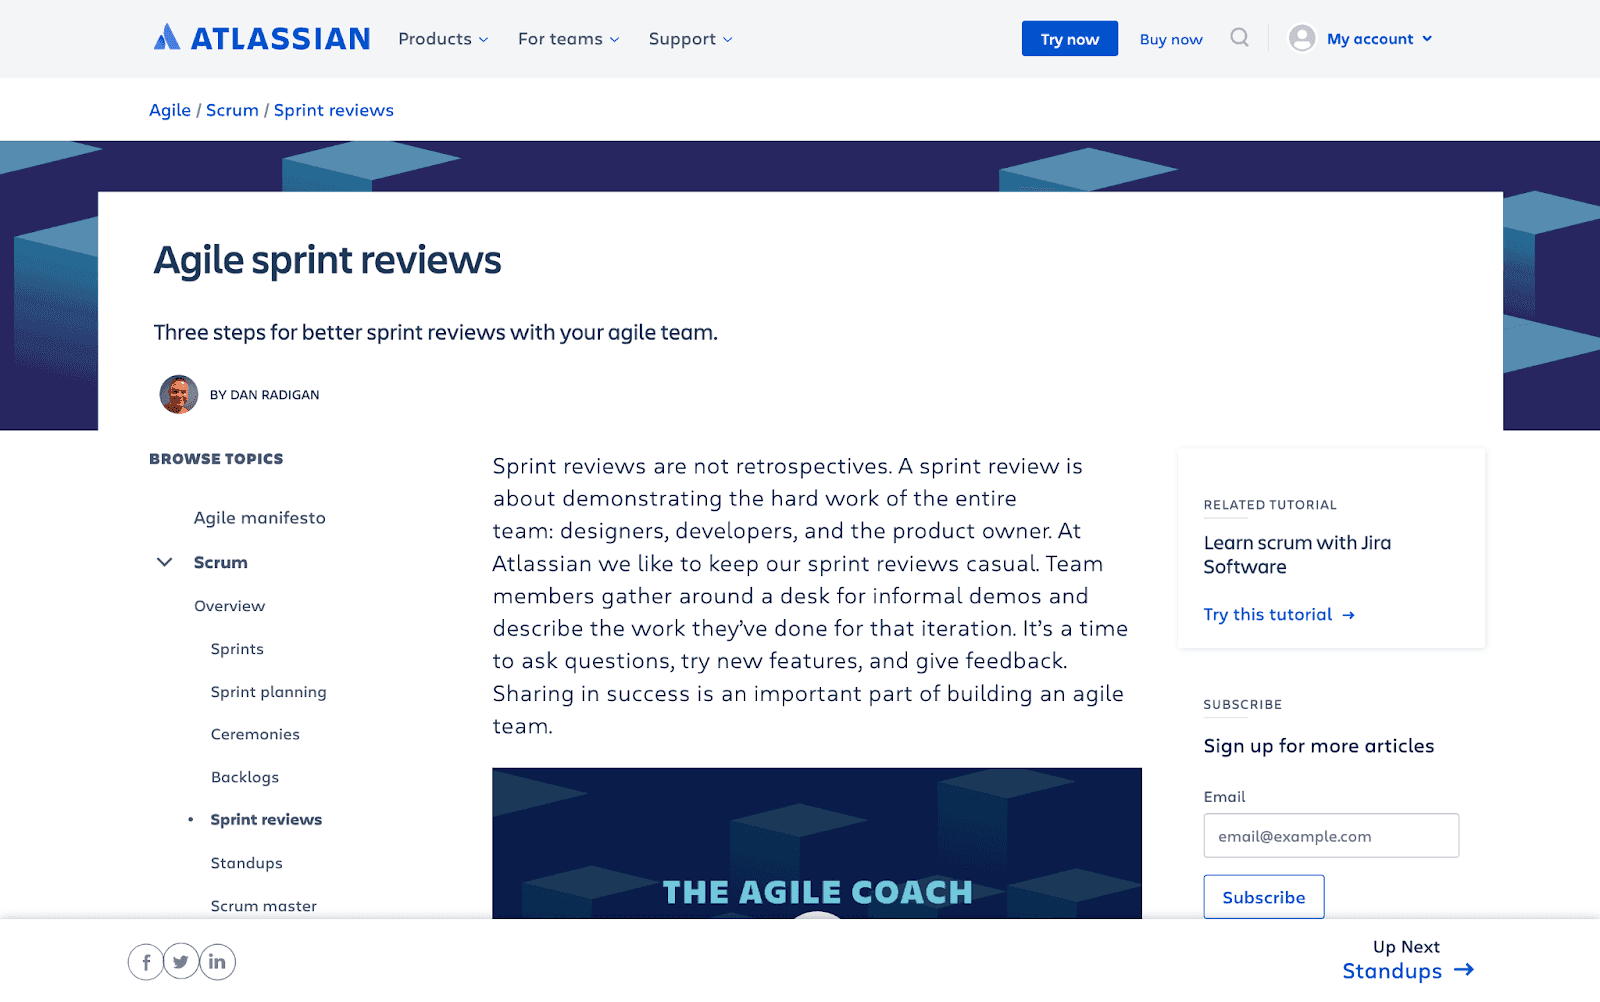 Atlassian presents three steps for better sprint reviews with your agile team.